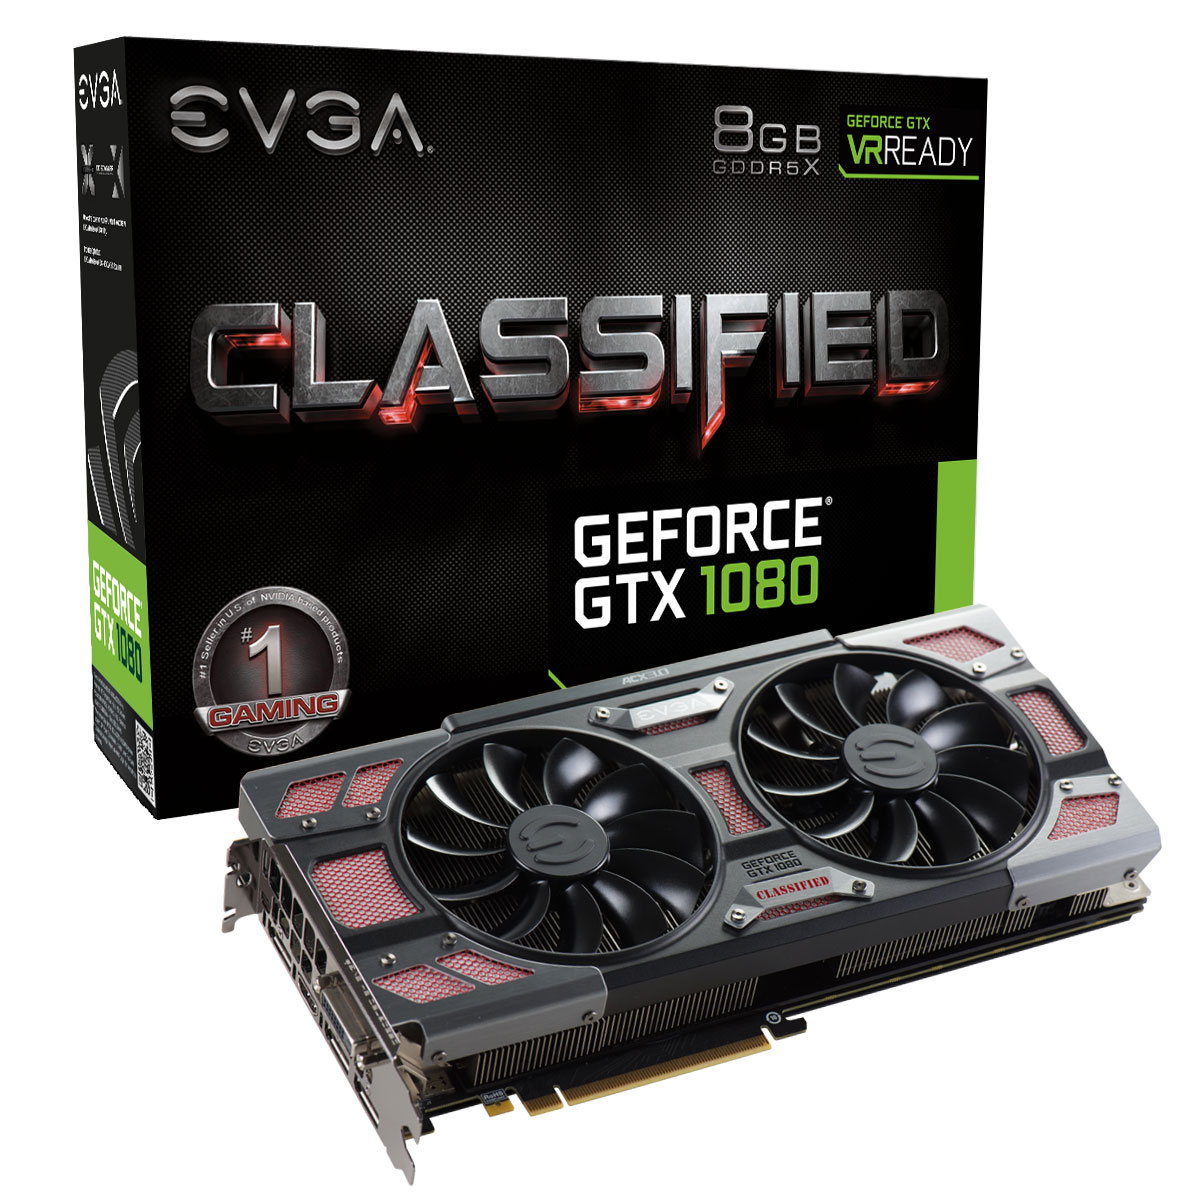 Media asset in full size related to 3dfxzone.it news item entitled as follows: EVGA annuncia cinque video card GeForce GTX 1080, reference e non | Image Name: news24333_EVGA-GeForce-GTX-1080-CLASSIFIED-GAMING-ACX-3_1.jpg